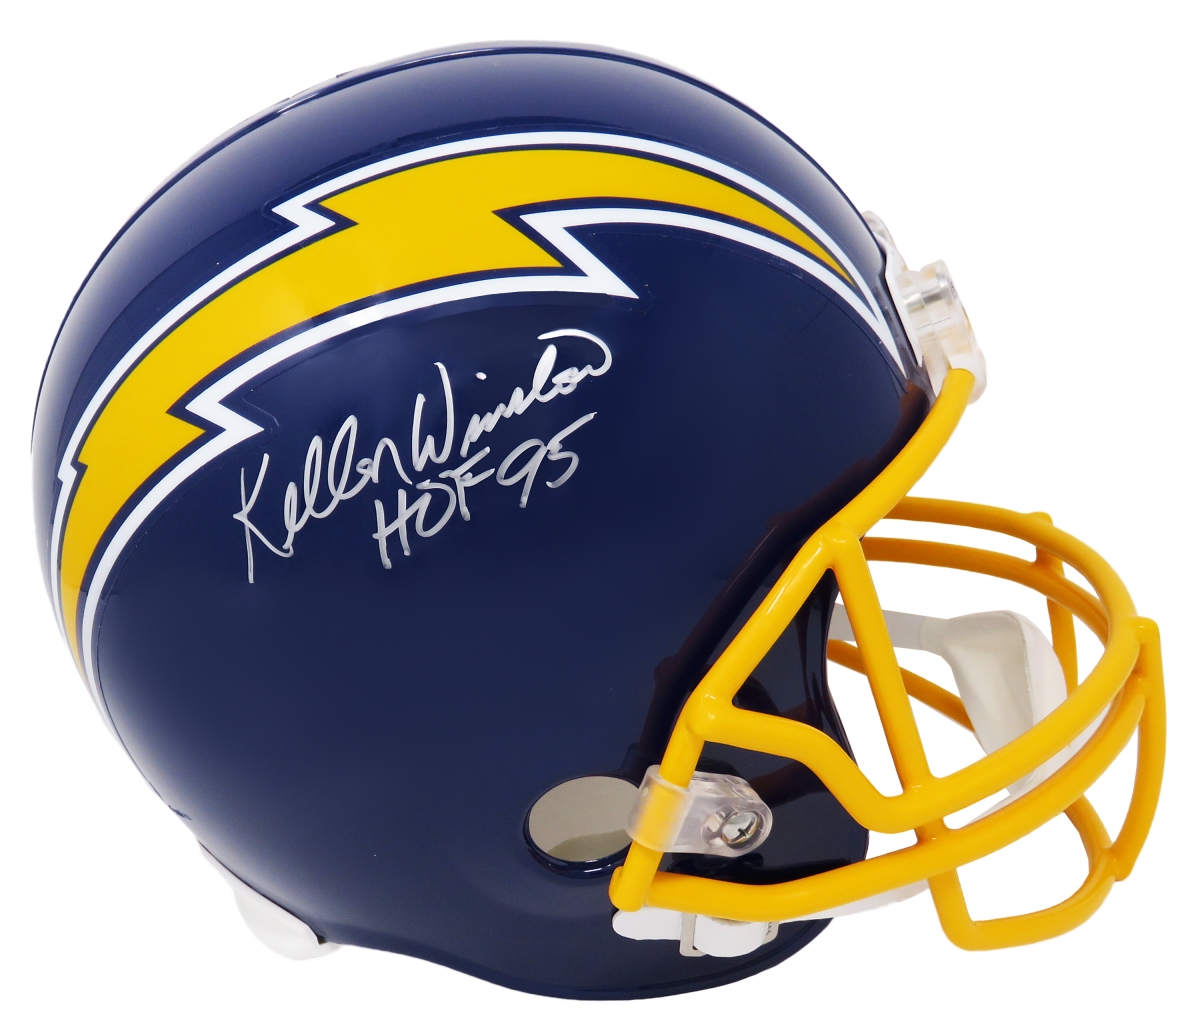 Picture of Schwartz Sports Memorabilia WINREP300 Kellen Winslow Signed San Diego Chargers Navy Throwback Riddell Full Size Replica Helmet with HOF95